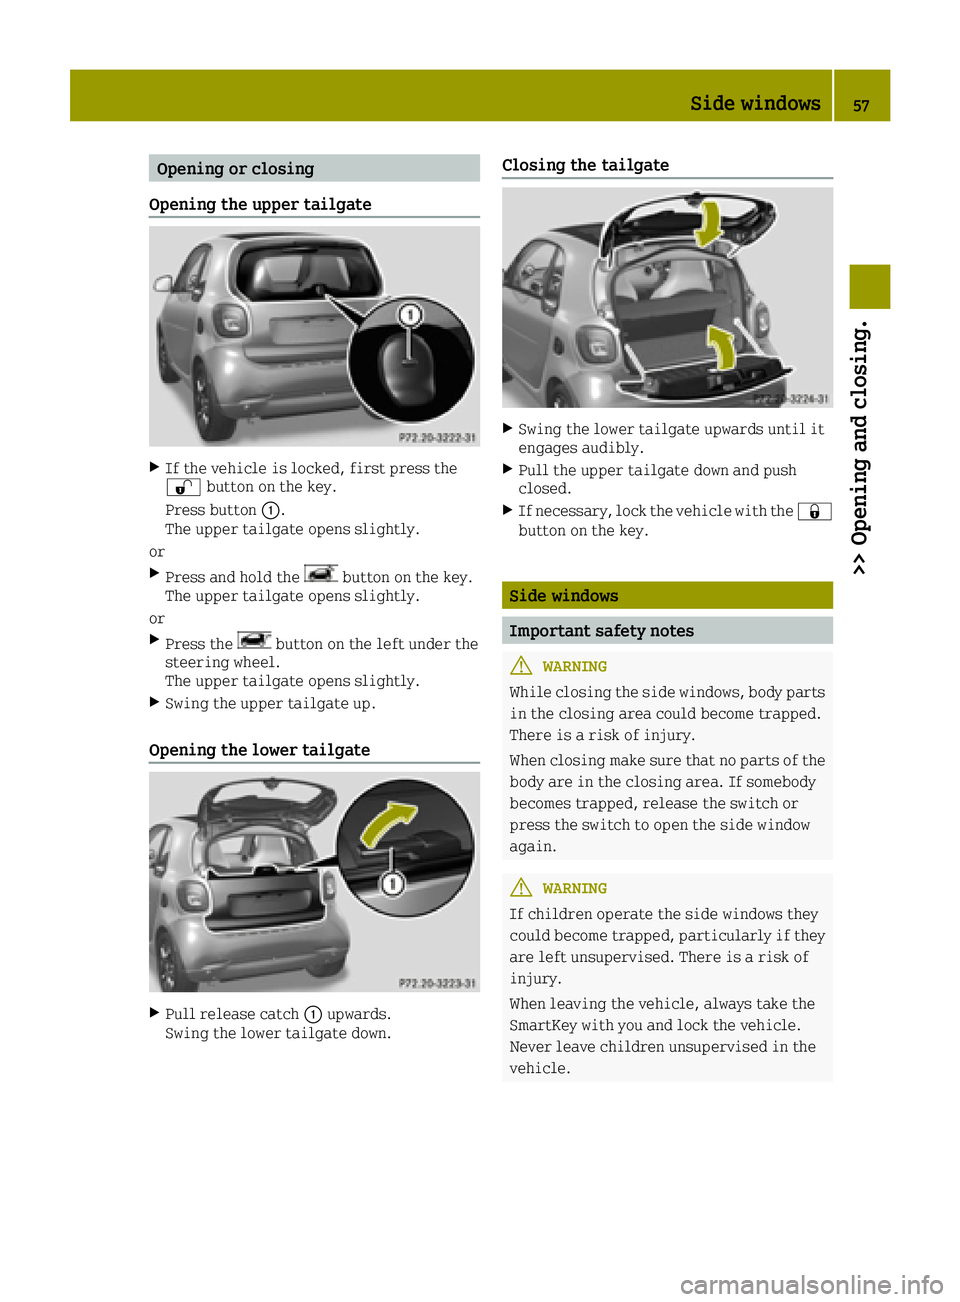 SMART FORTWO 2016  Owners Manual Opening or closing
Opening the upper tailgate
XIf the vehicle is locked, first press the
0036 button on the key.
Press button 0043.
The upper tailgate opens slightly.
or
XPress and hold thebutton on t